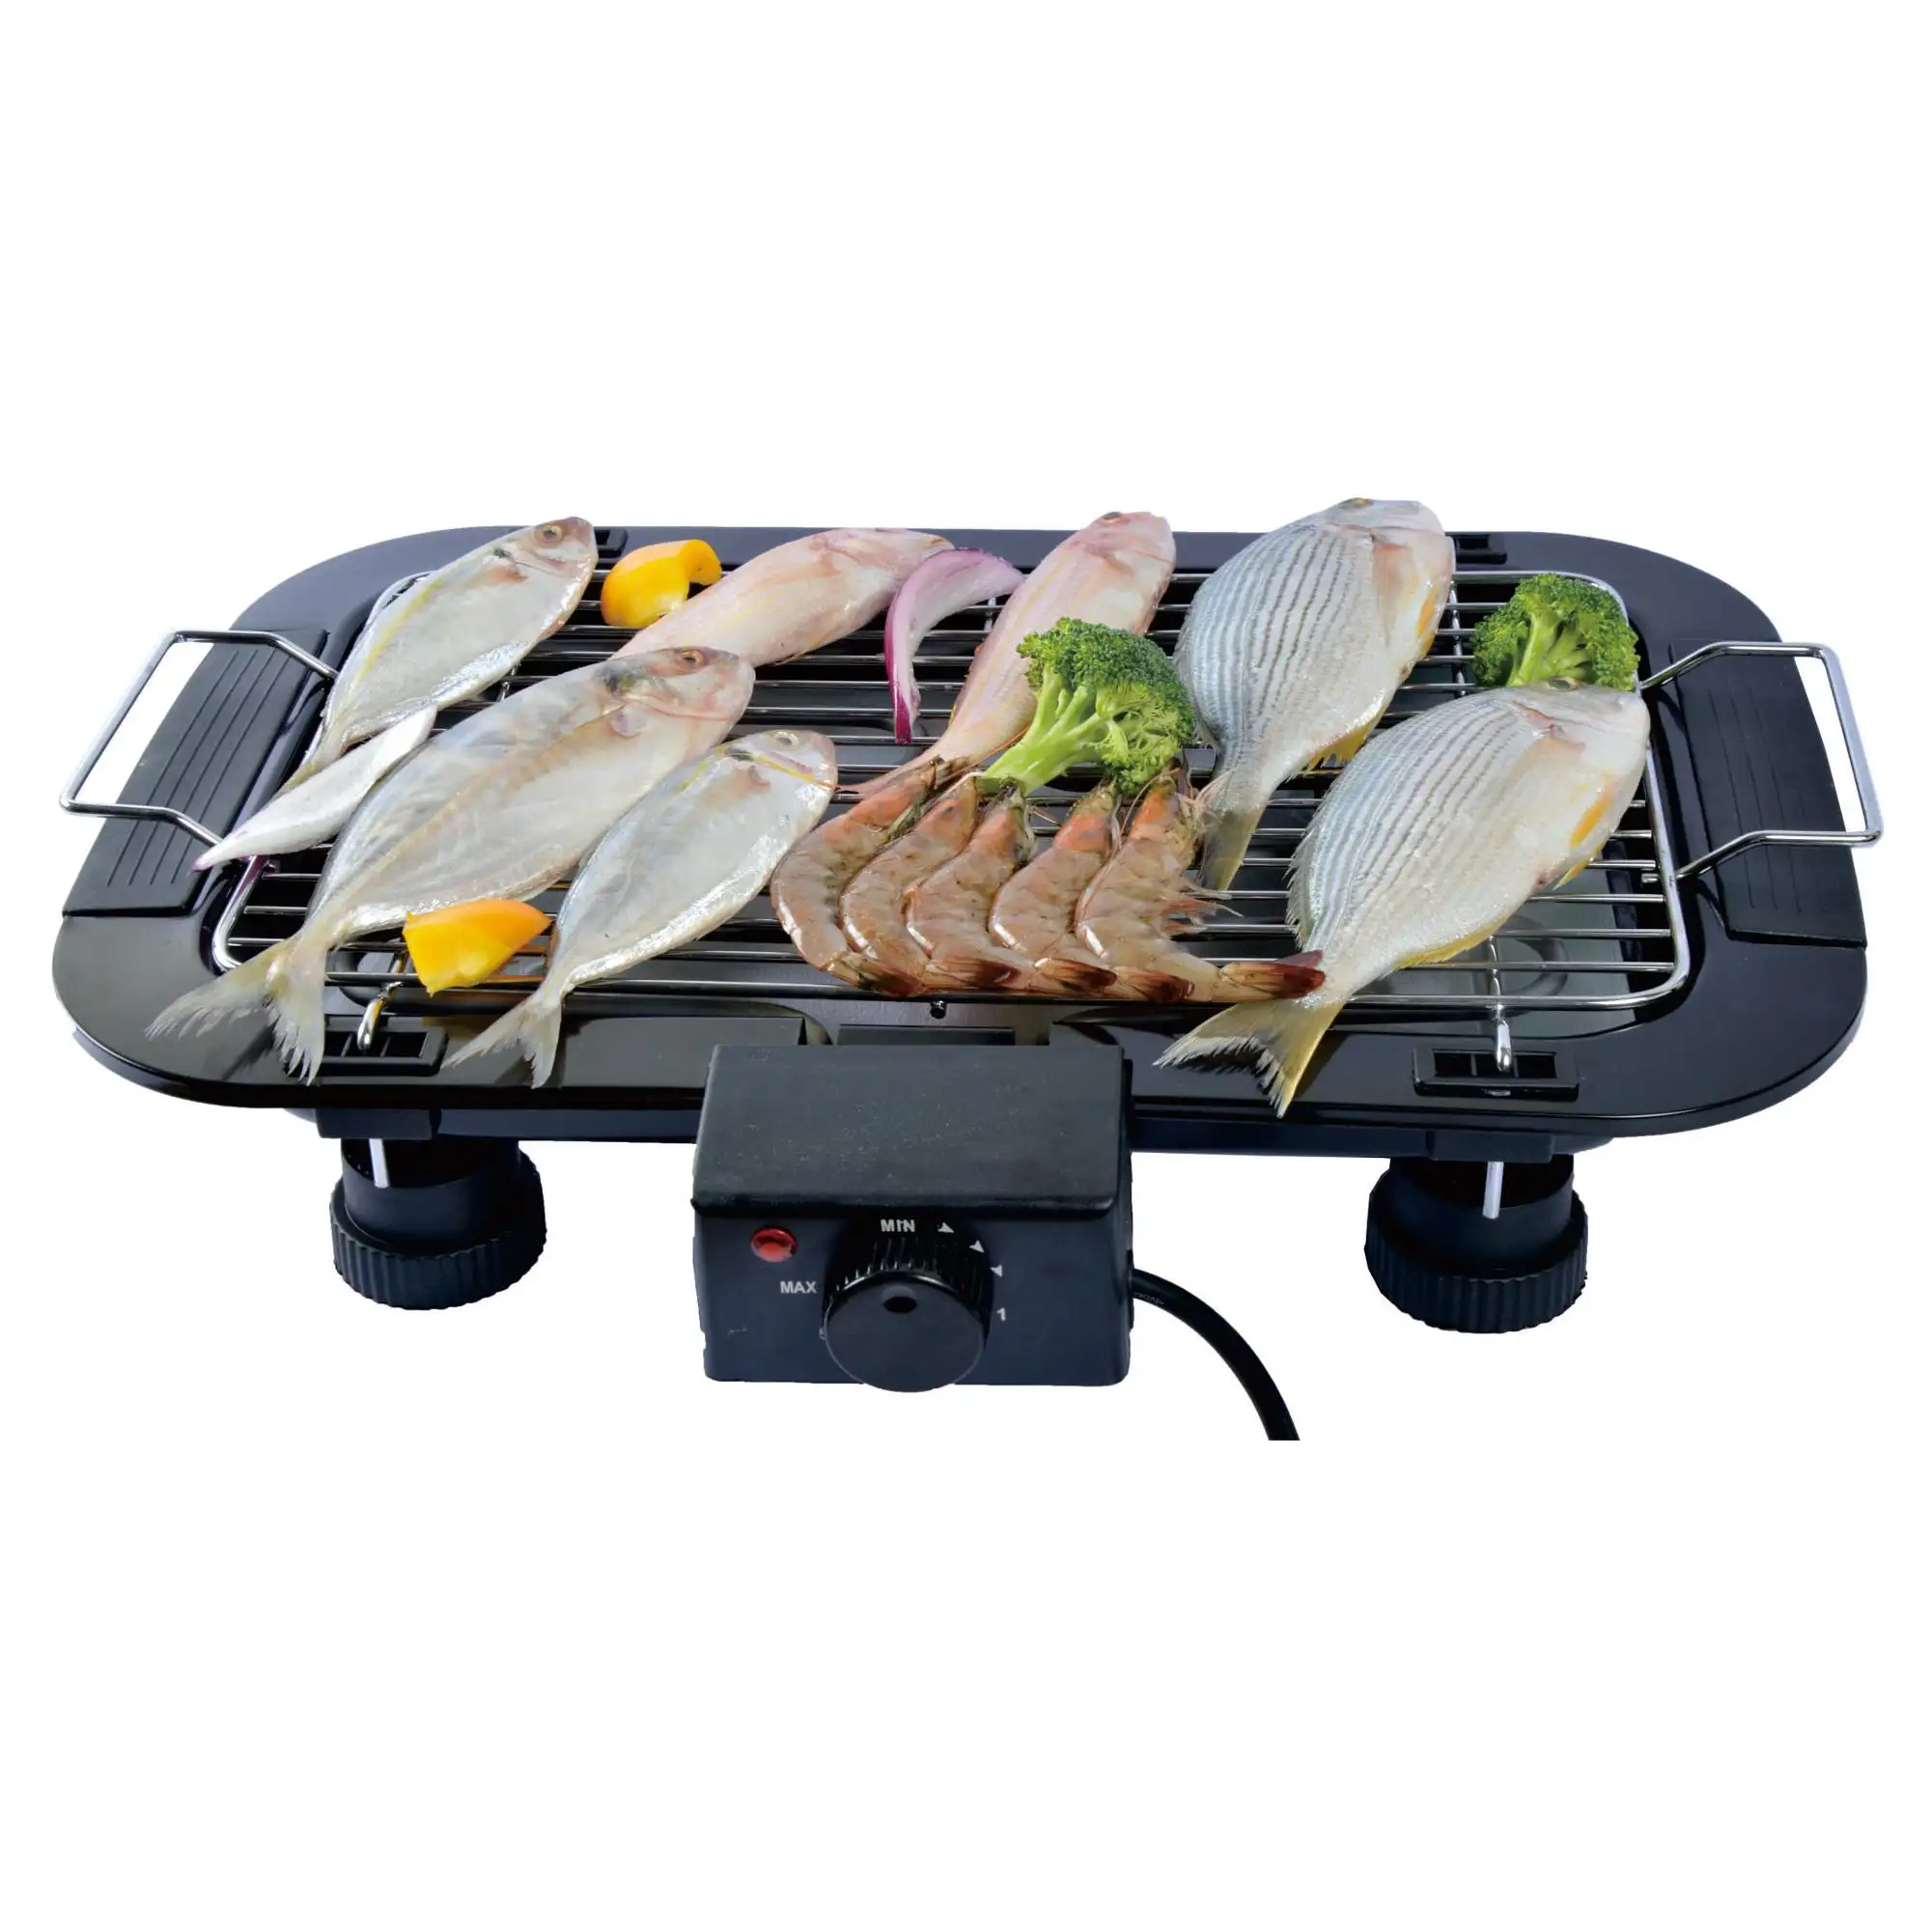 Grill Barbecue Thermostat Grill Height Adjustable BBQ Electric Barbecue Grill